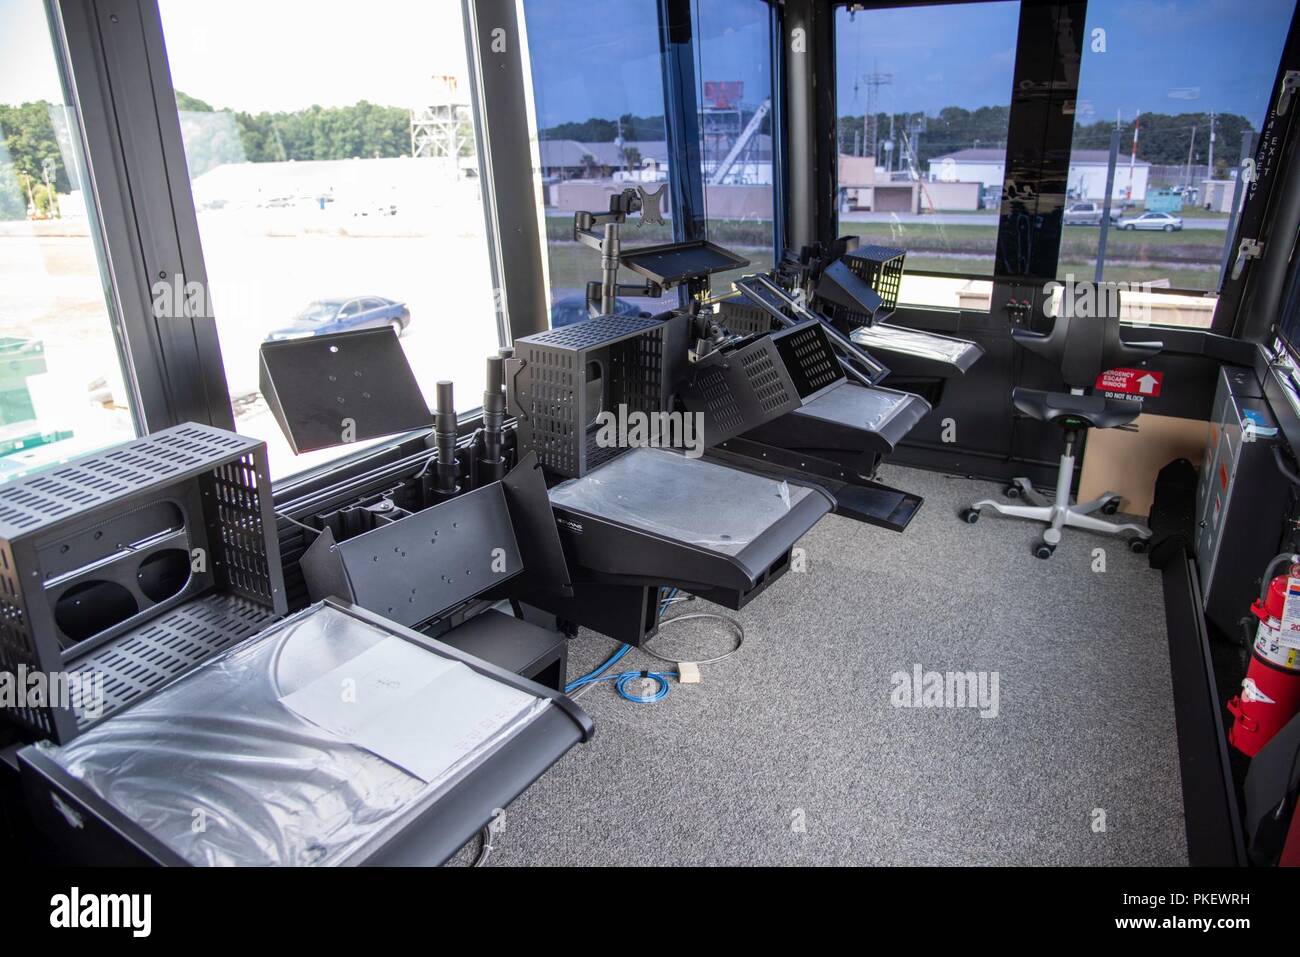 Charleston, S.C. (26 July, 2018) The inside of a newly constructed Large Mobile Air Traffic Control Tower (LMATCT) is displayed at the Joint Base Charleston - Weapons Station during an inspection with members from Space and Naval Warfare Systems Center (SSC) Atlantic and the Federal Aviation Administration. SSC Atlantic worked with the FAA to provide the integration and engineering support for upgrading the LMATCTs due to their extensive background in deployable control centers. The FAA is scheduled to roll out three LMATCT platforms by Fiscal Year 2019, replacing older models originally const Stock Photo